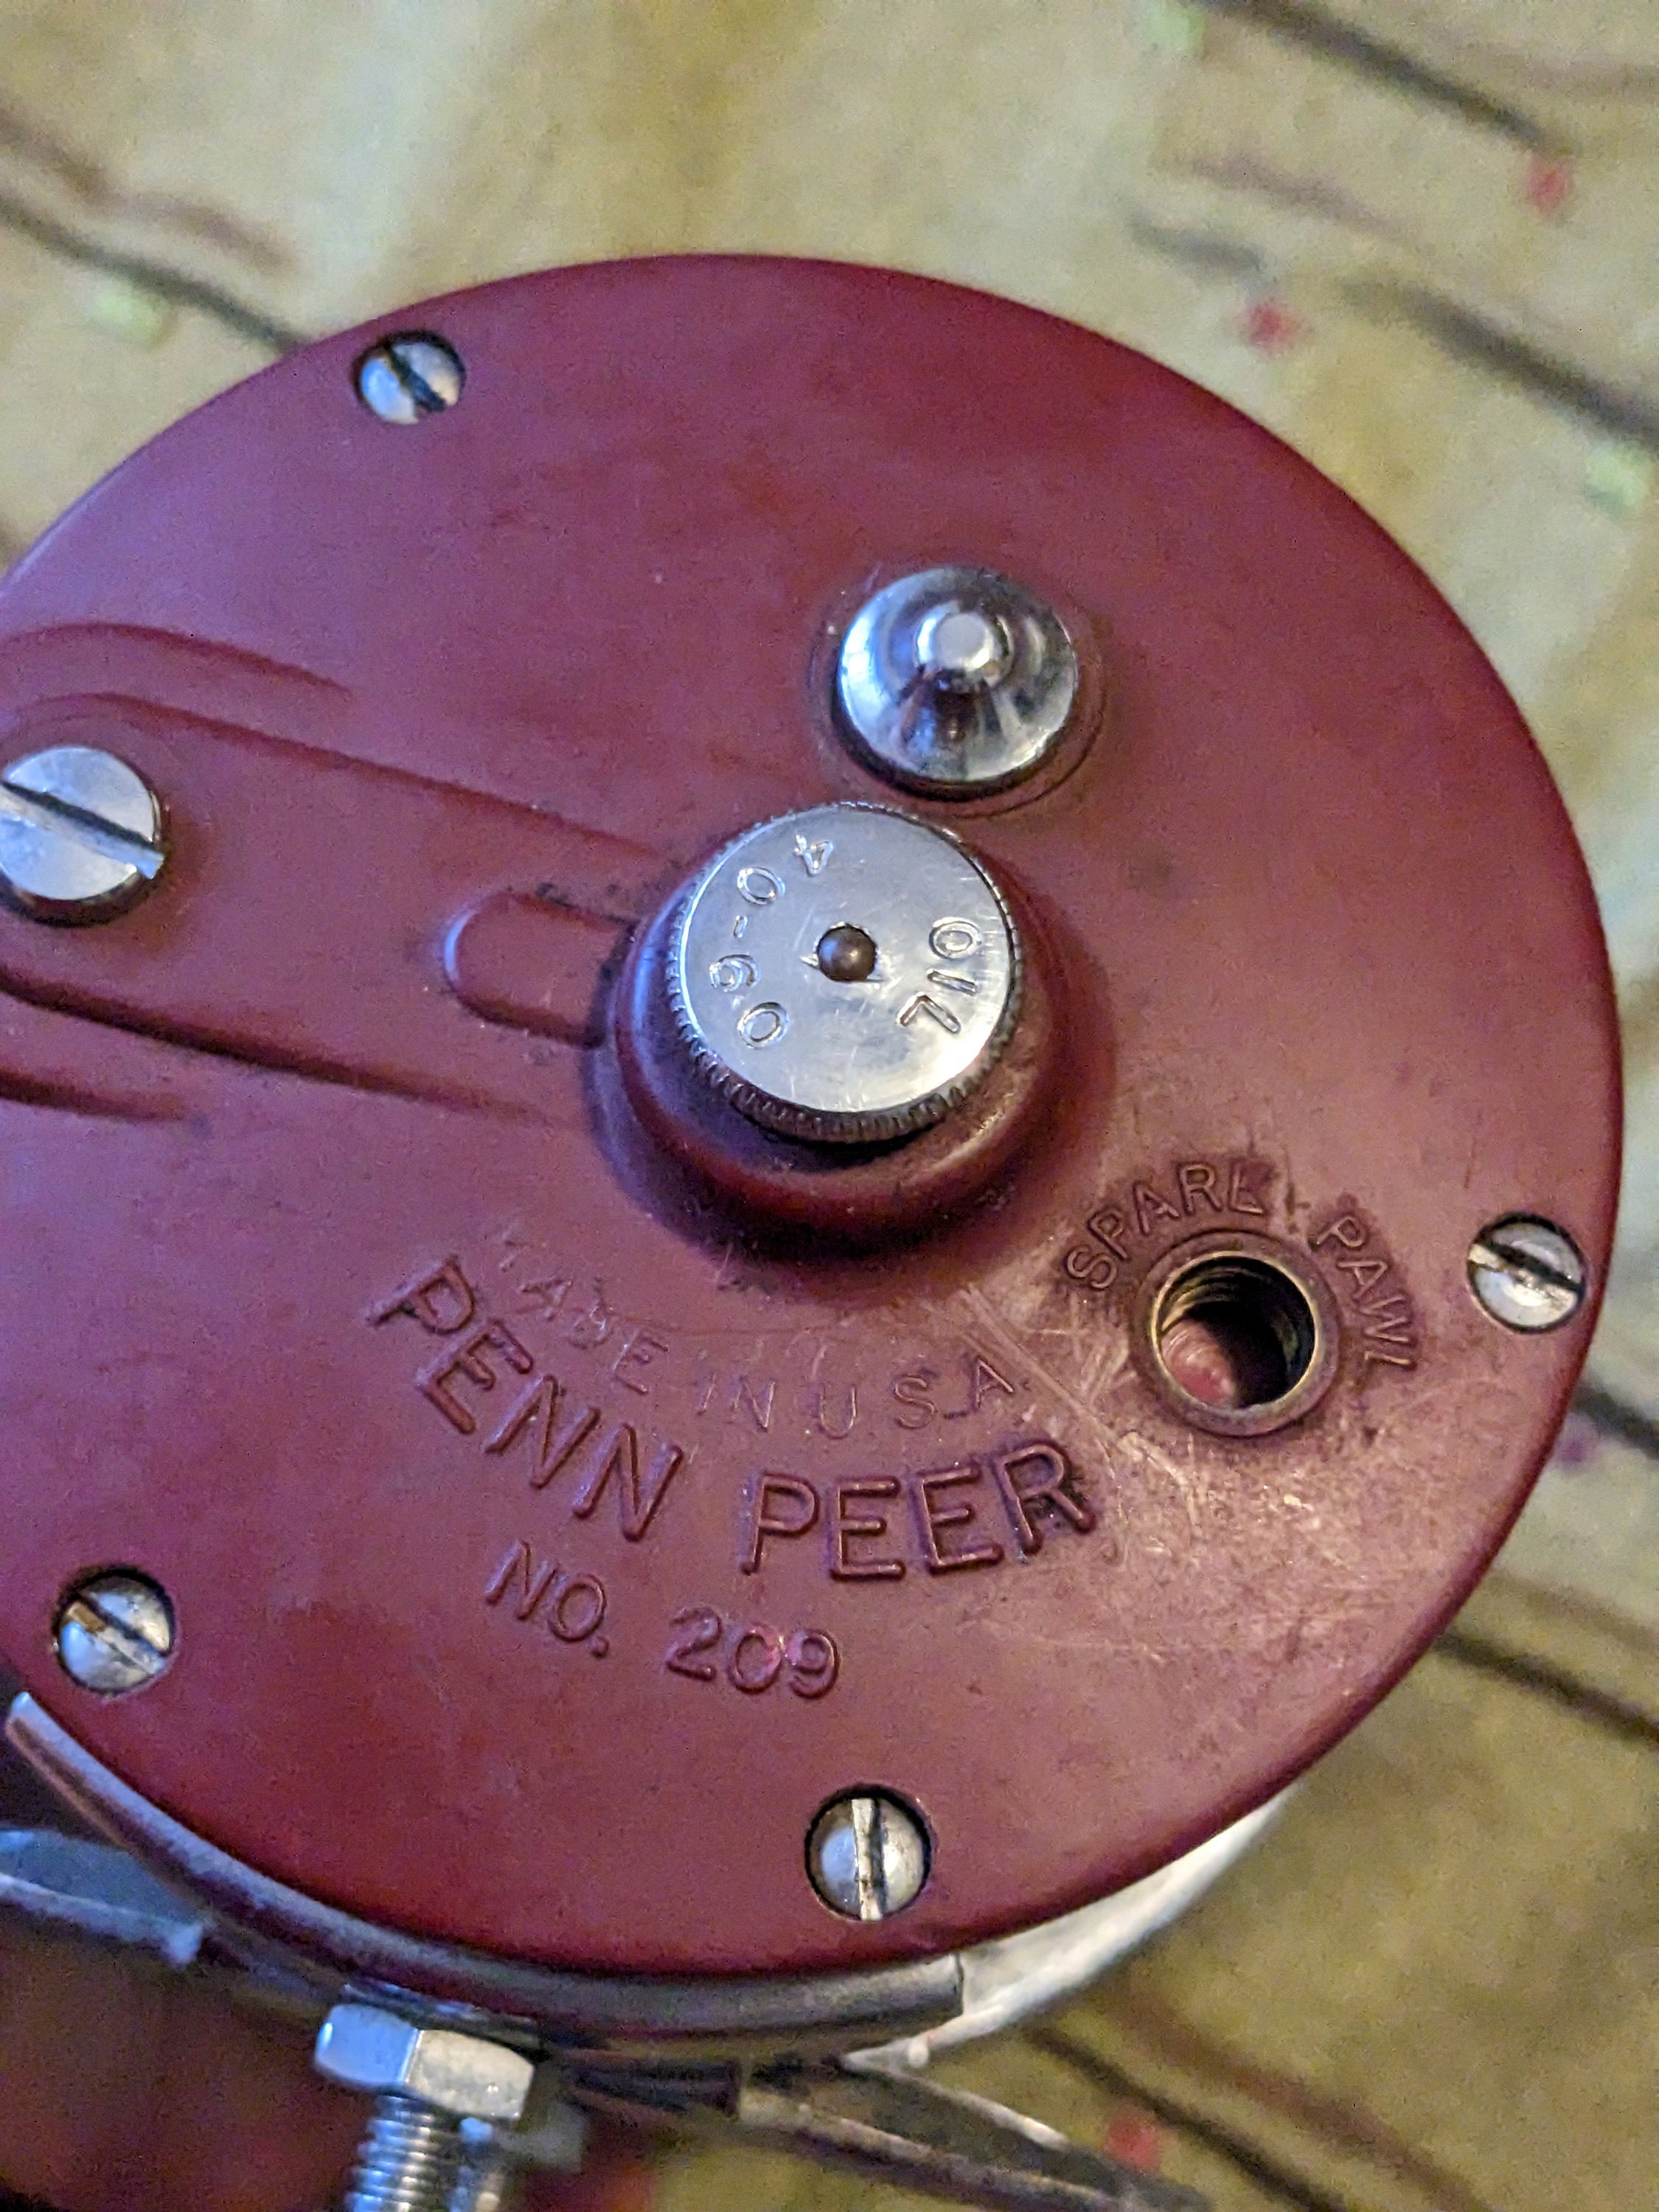 PENN No. 209 Level Wind Red Saltwater Classic Fishing Reel - Etsy